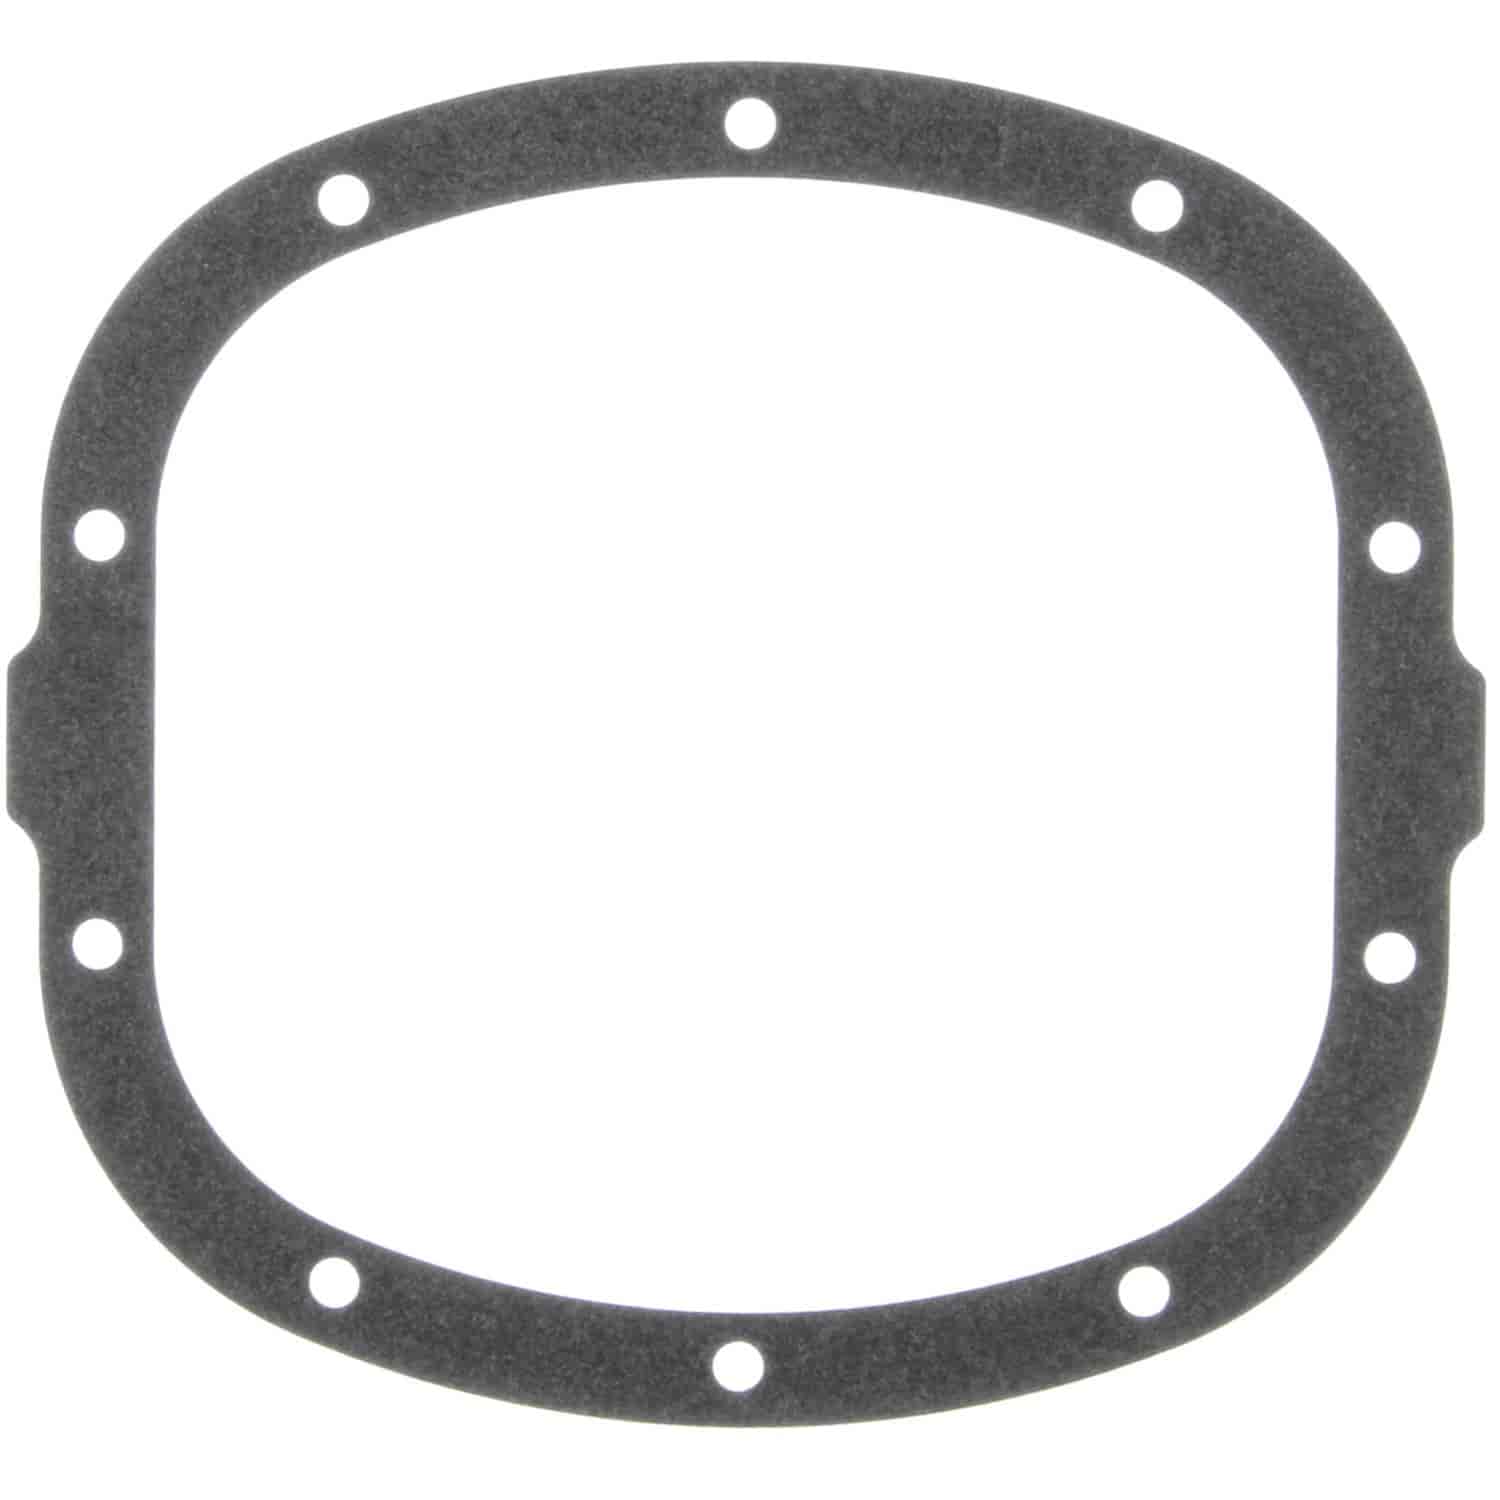 Axle Housing Cover Gasket 1972-2003 GM 10-Bolt 7.5"